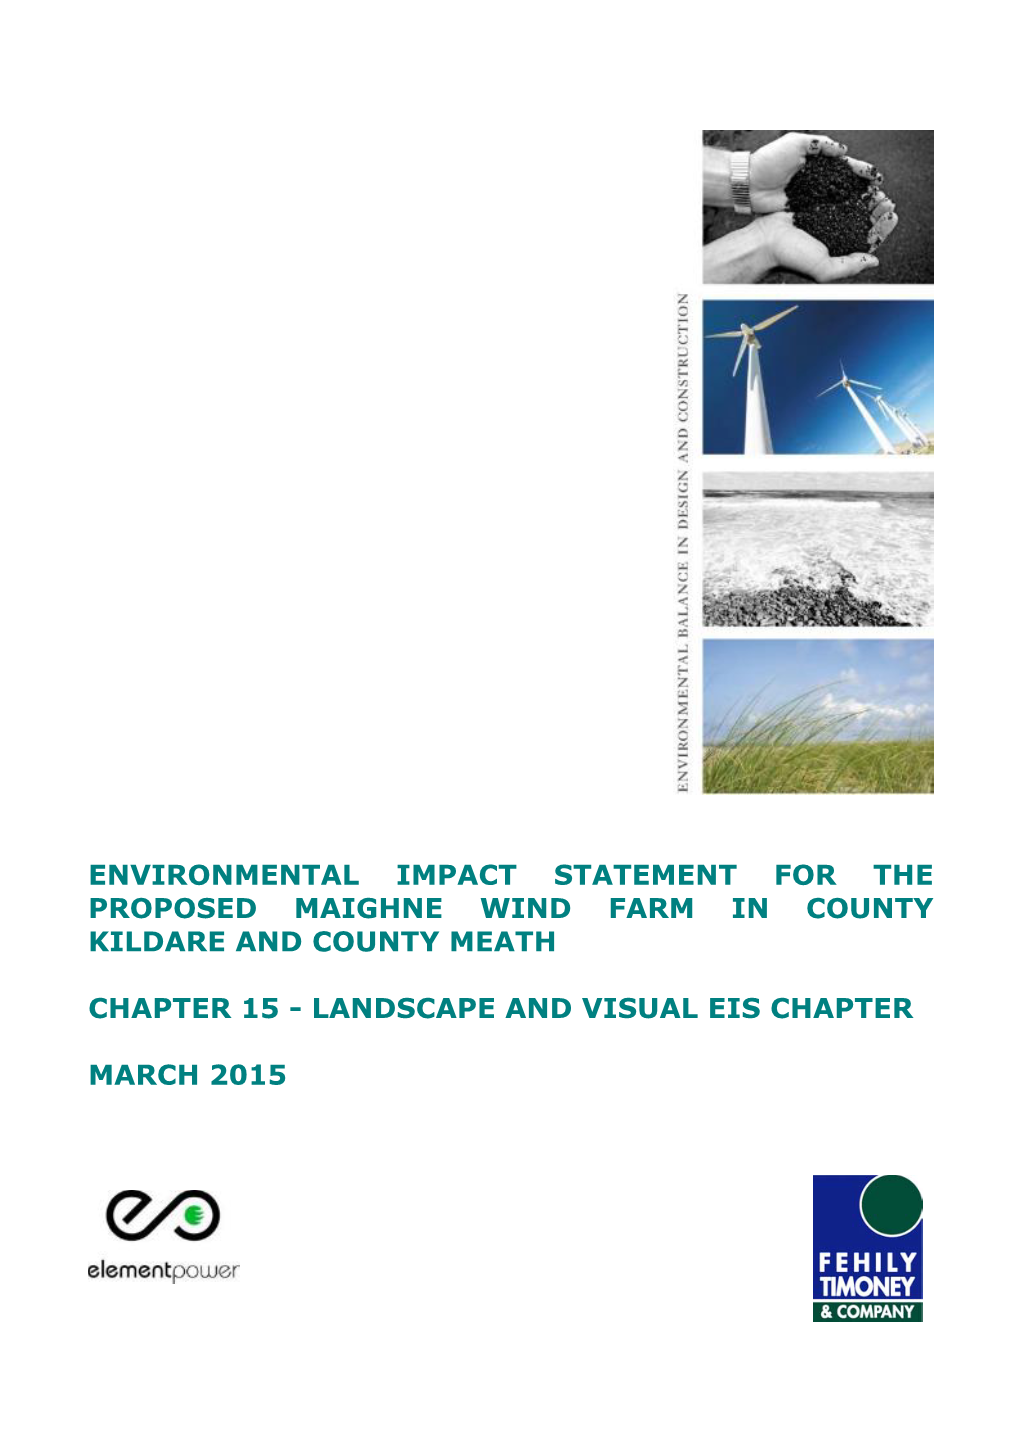 Environmental Impact Statement for the Proposed Maighne Wind Farm in County Kildare and County Meath